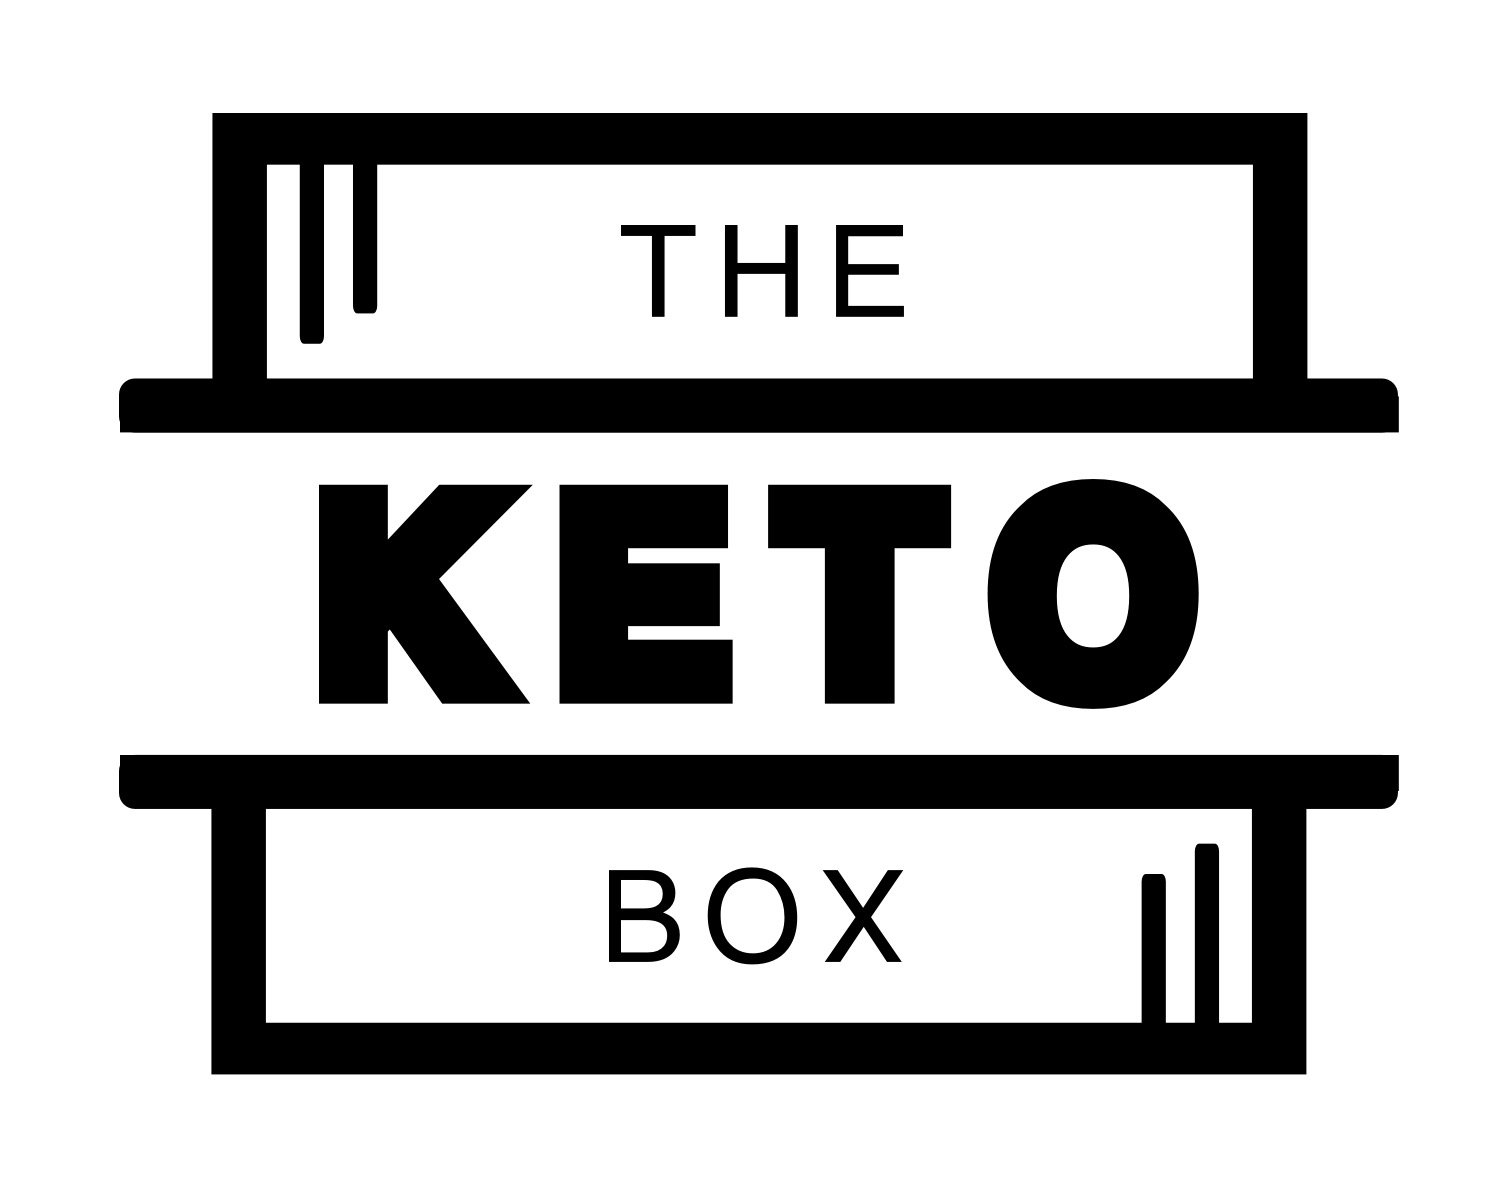 Get 8-11 Keto snacks delivered to your door for $40 a month!